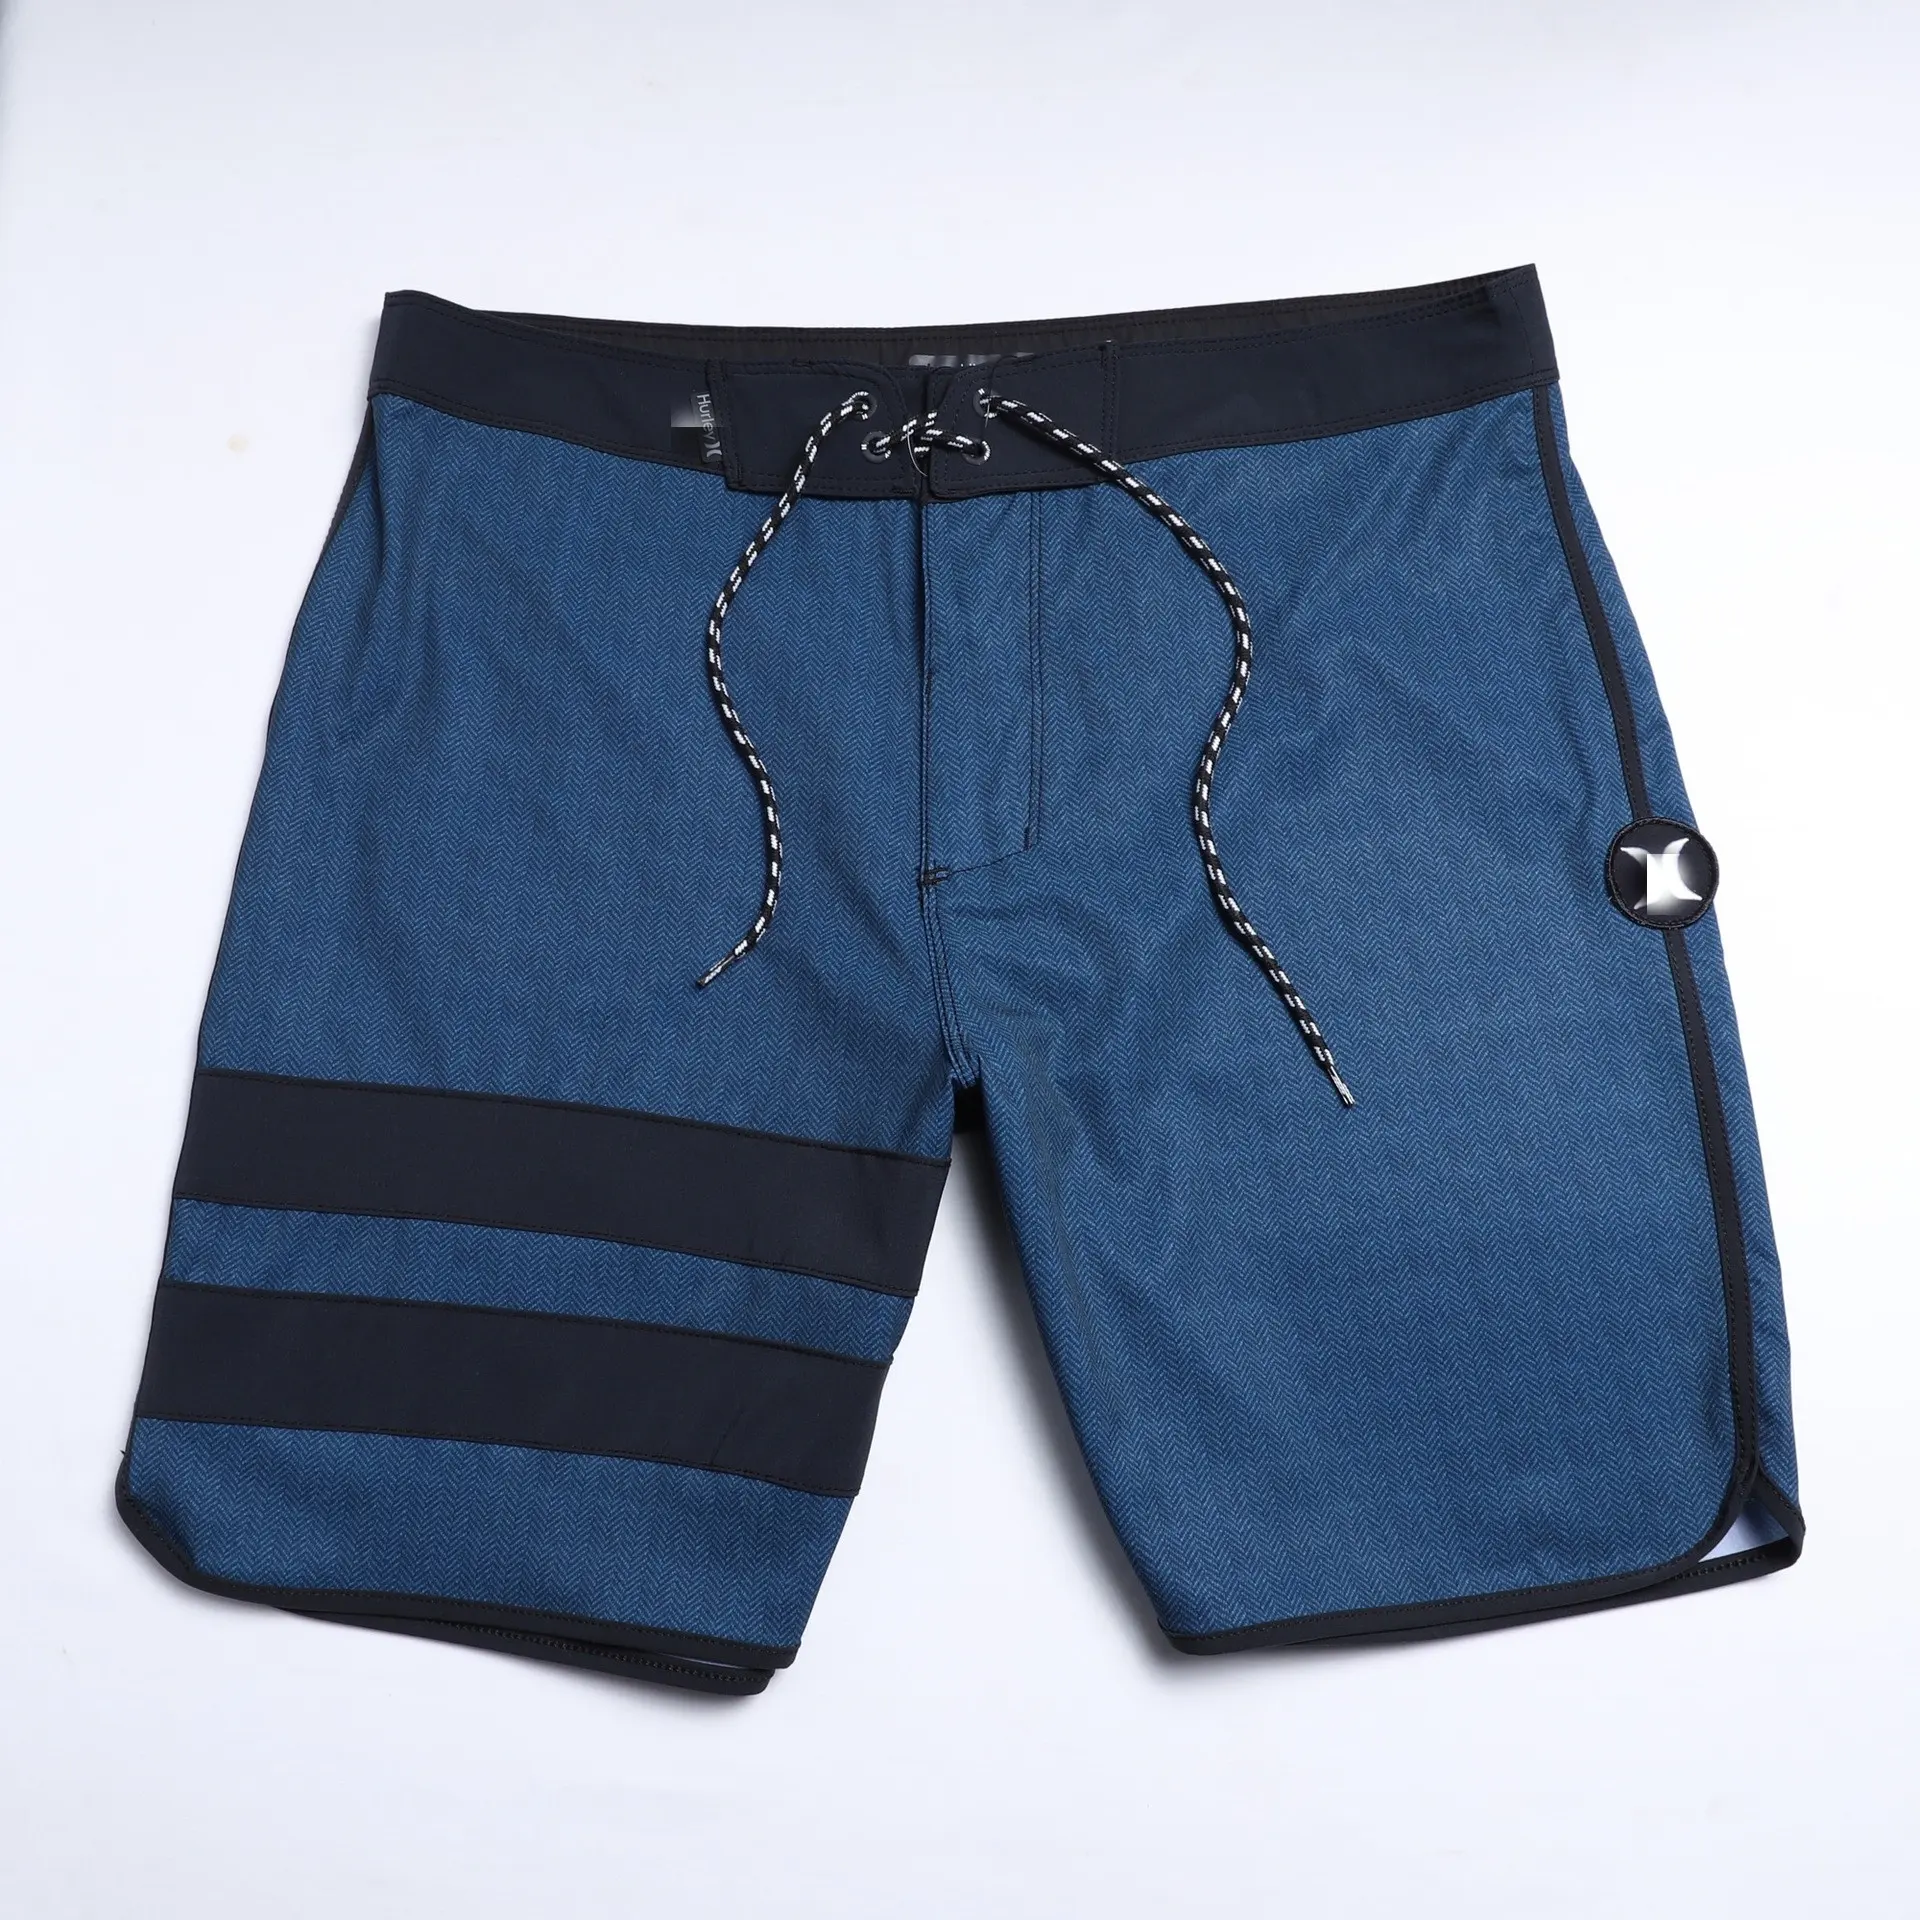 2022 surf swimming trunks shorts quick dry mens beach board shorts